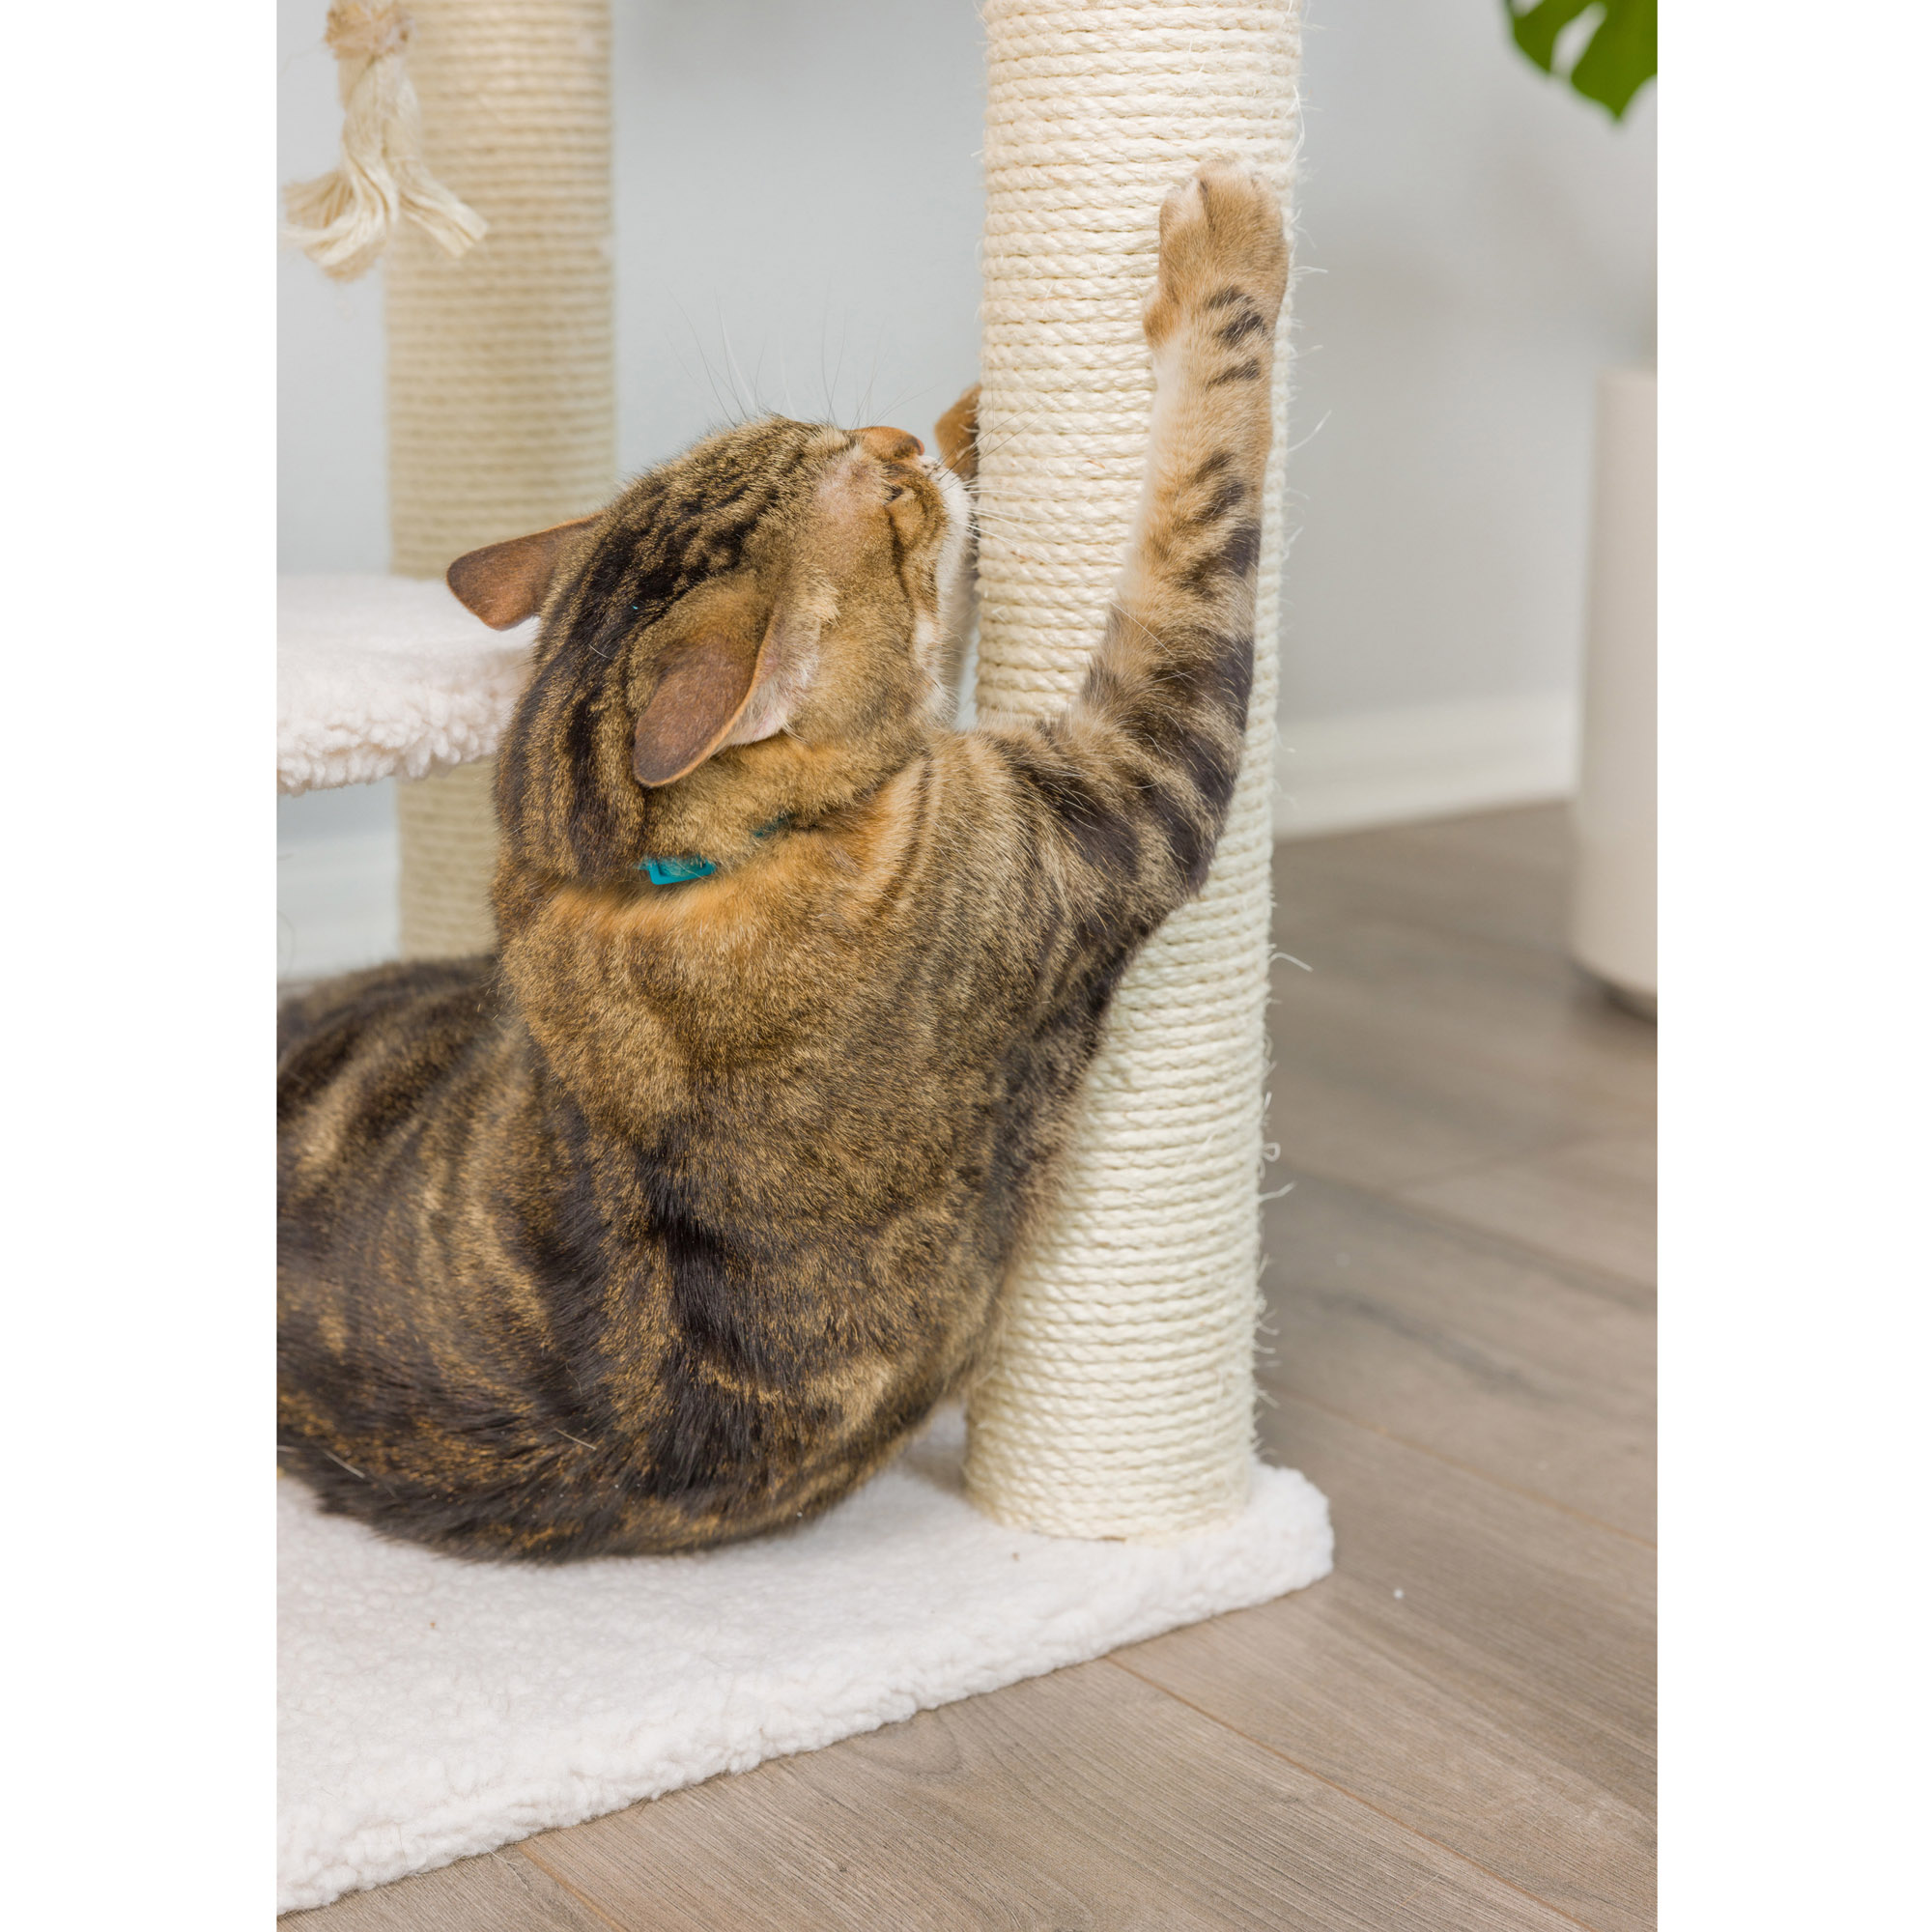 Armarkat 78-in real wood Cat Tree & Condo Scratching Post Tower, Beige - image 5 of 10